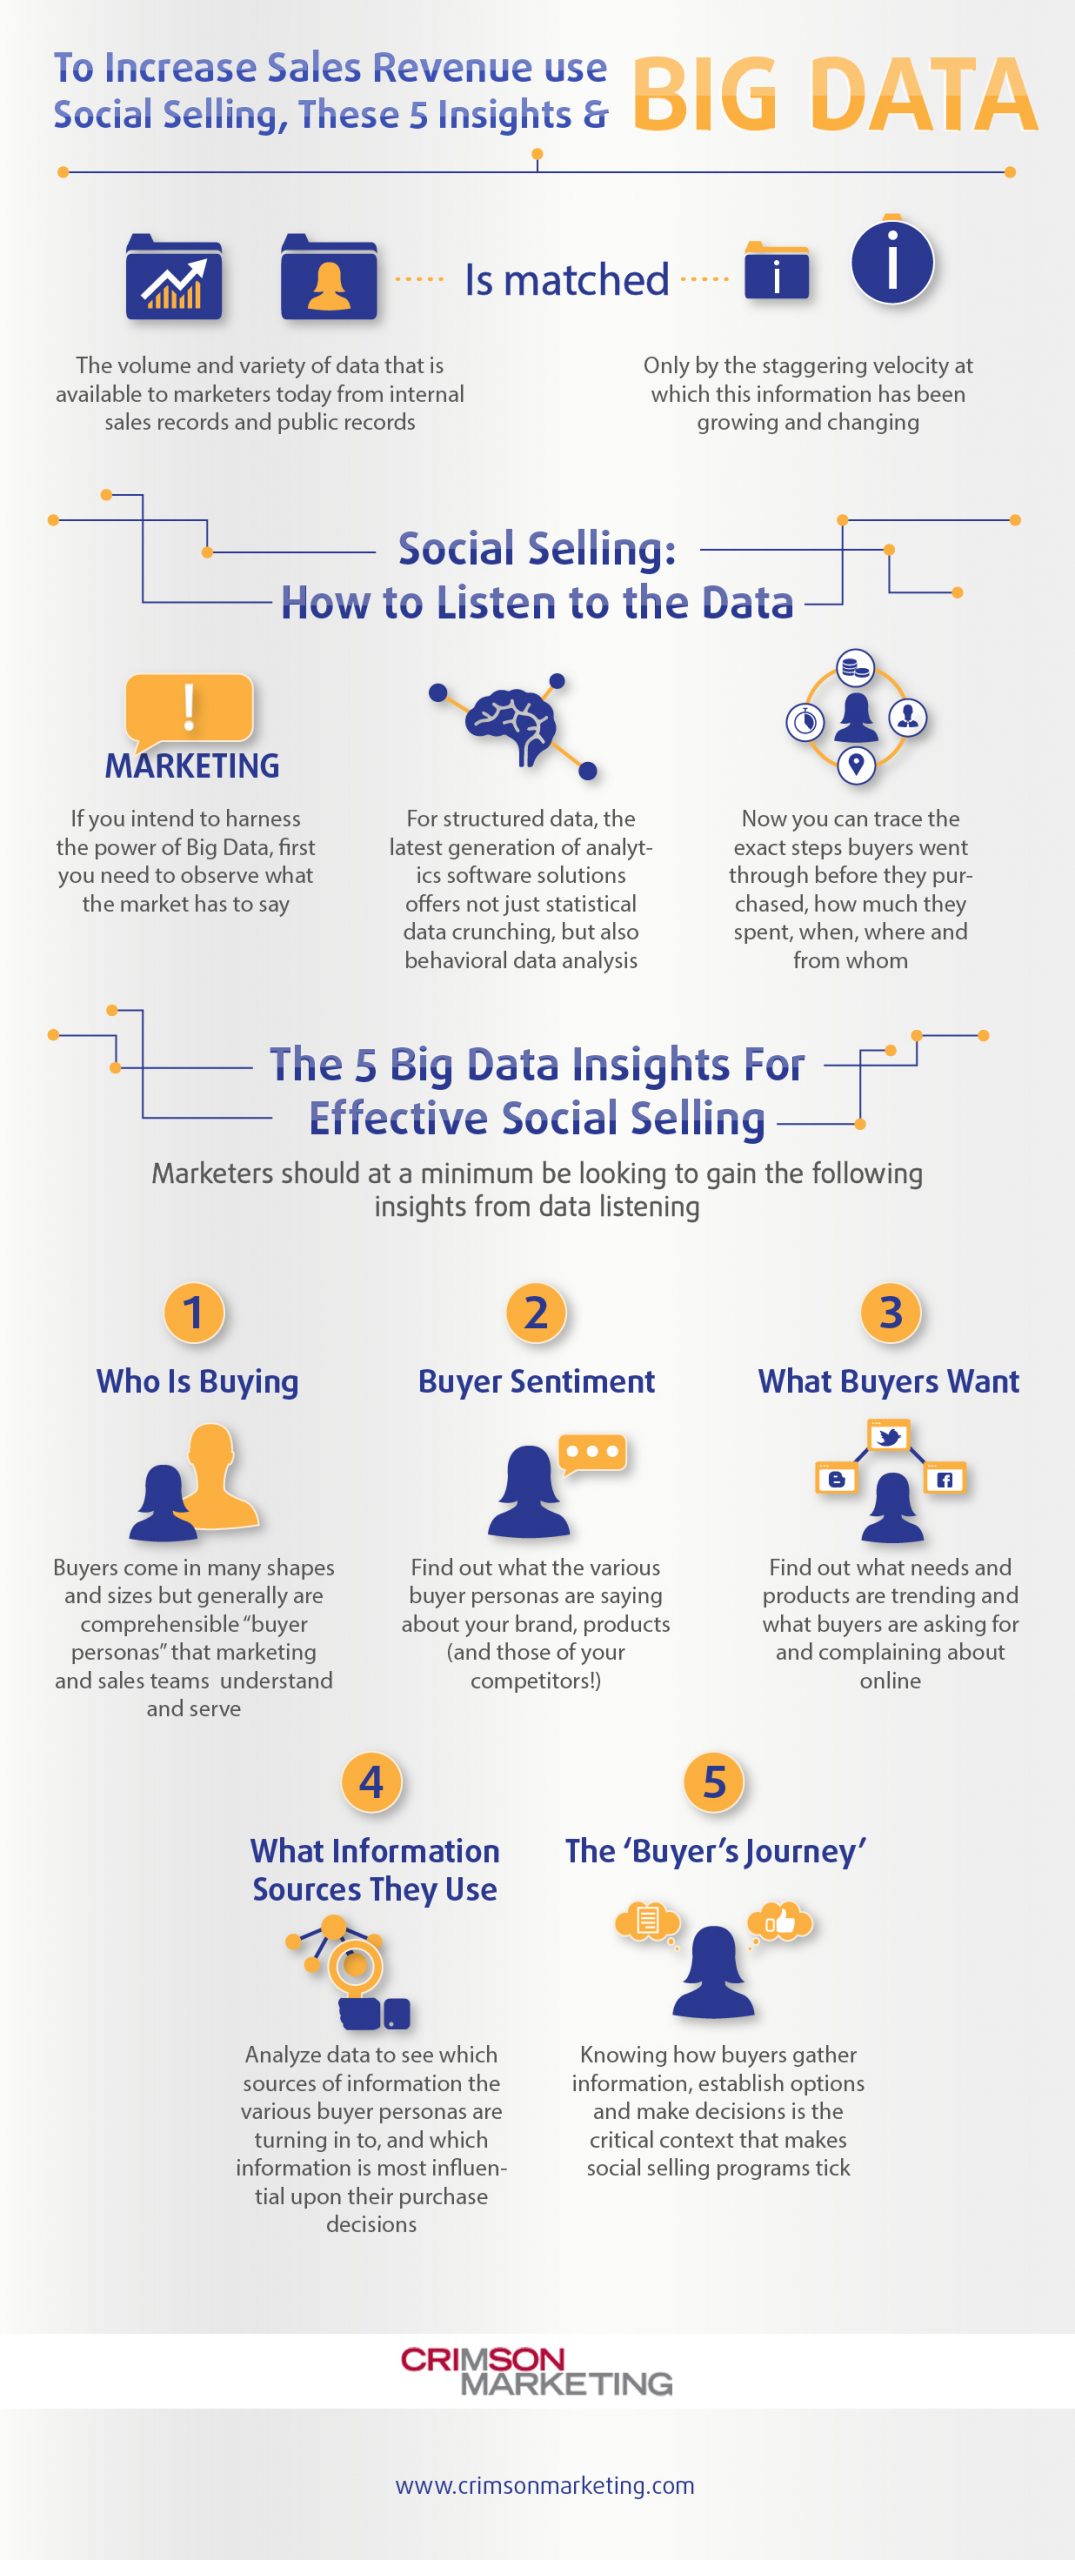 How To Increase Your Sales Using Big Data And Social Selling - Infographic